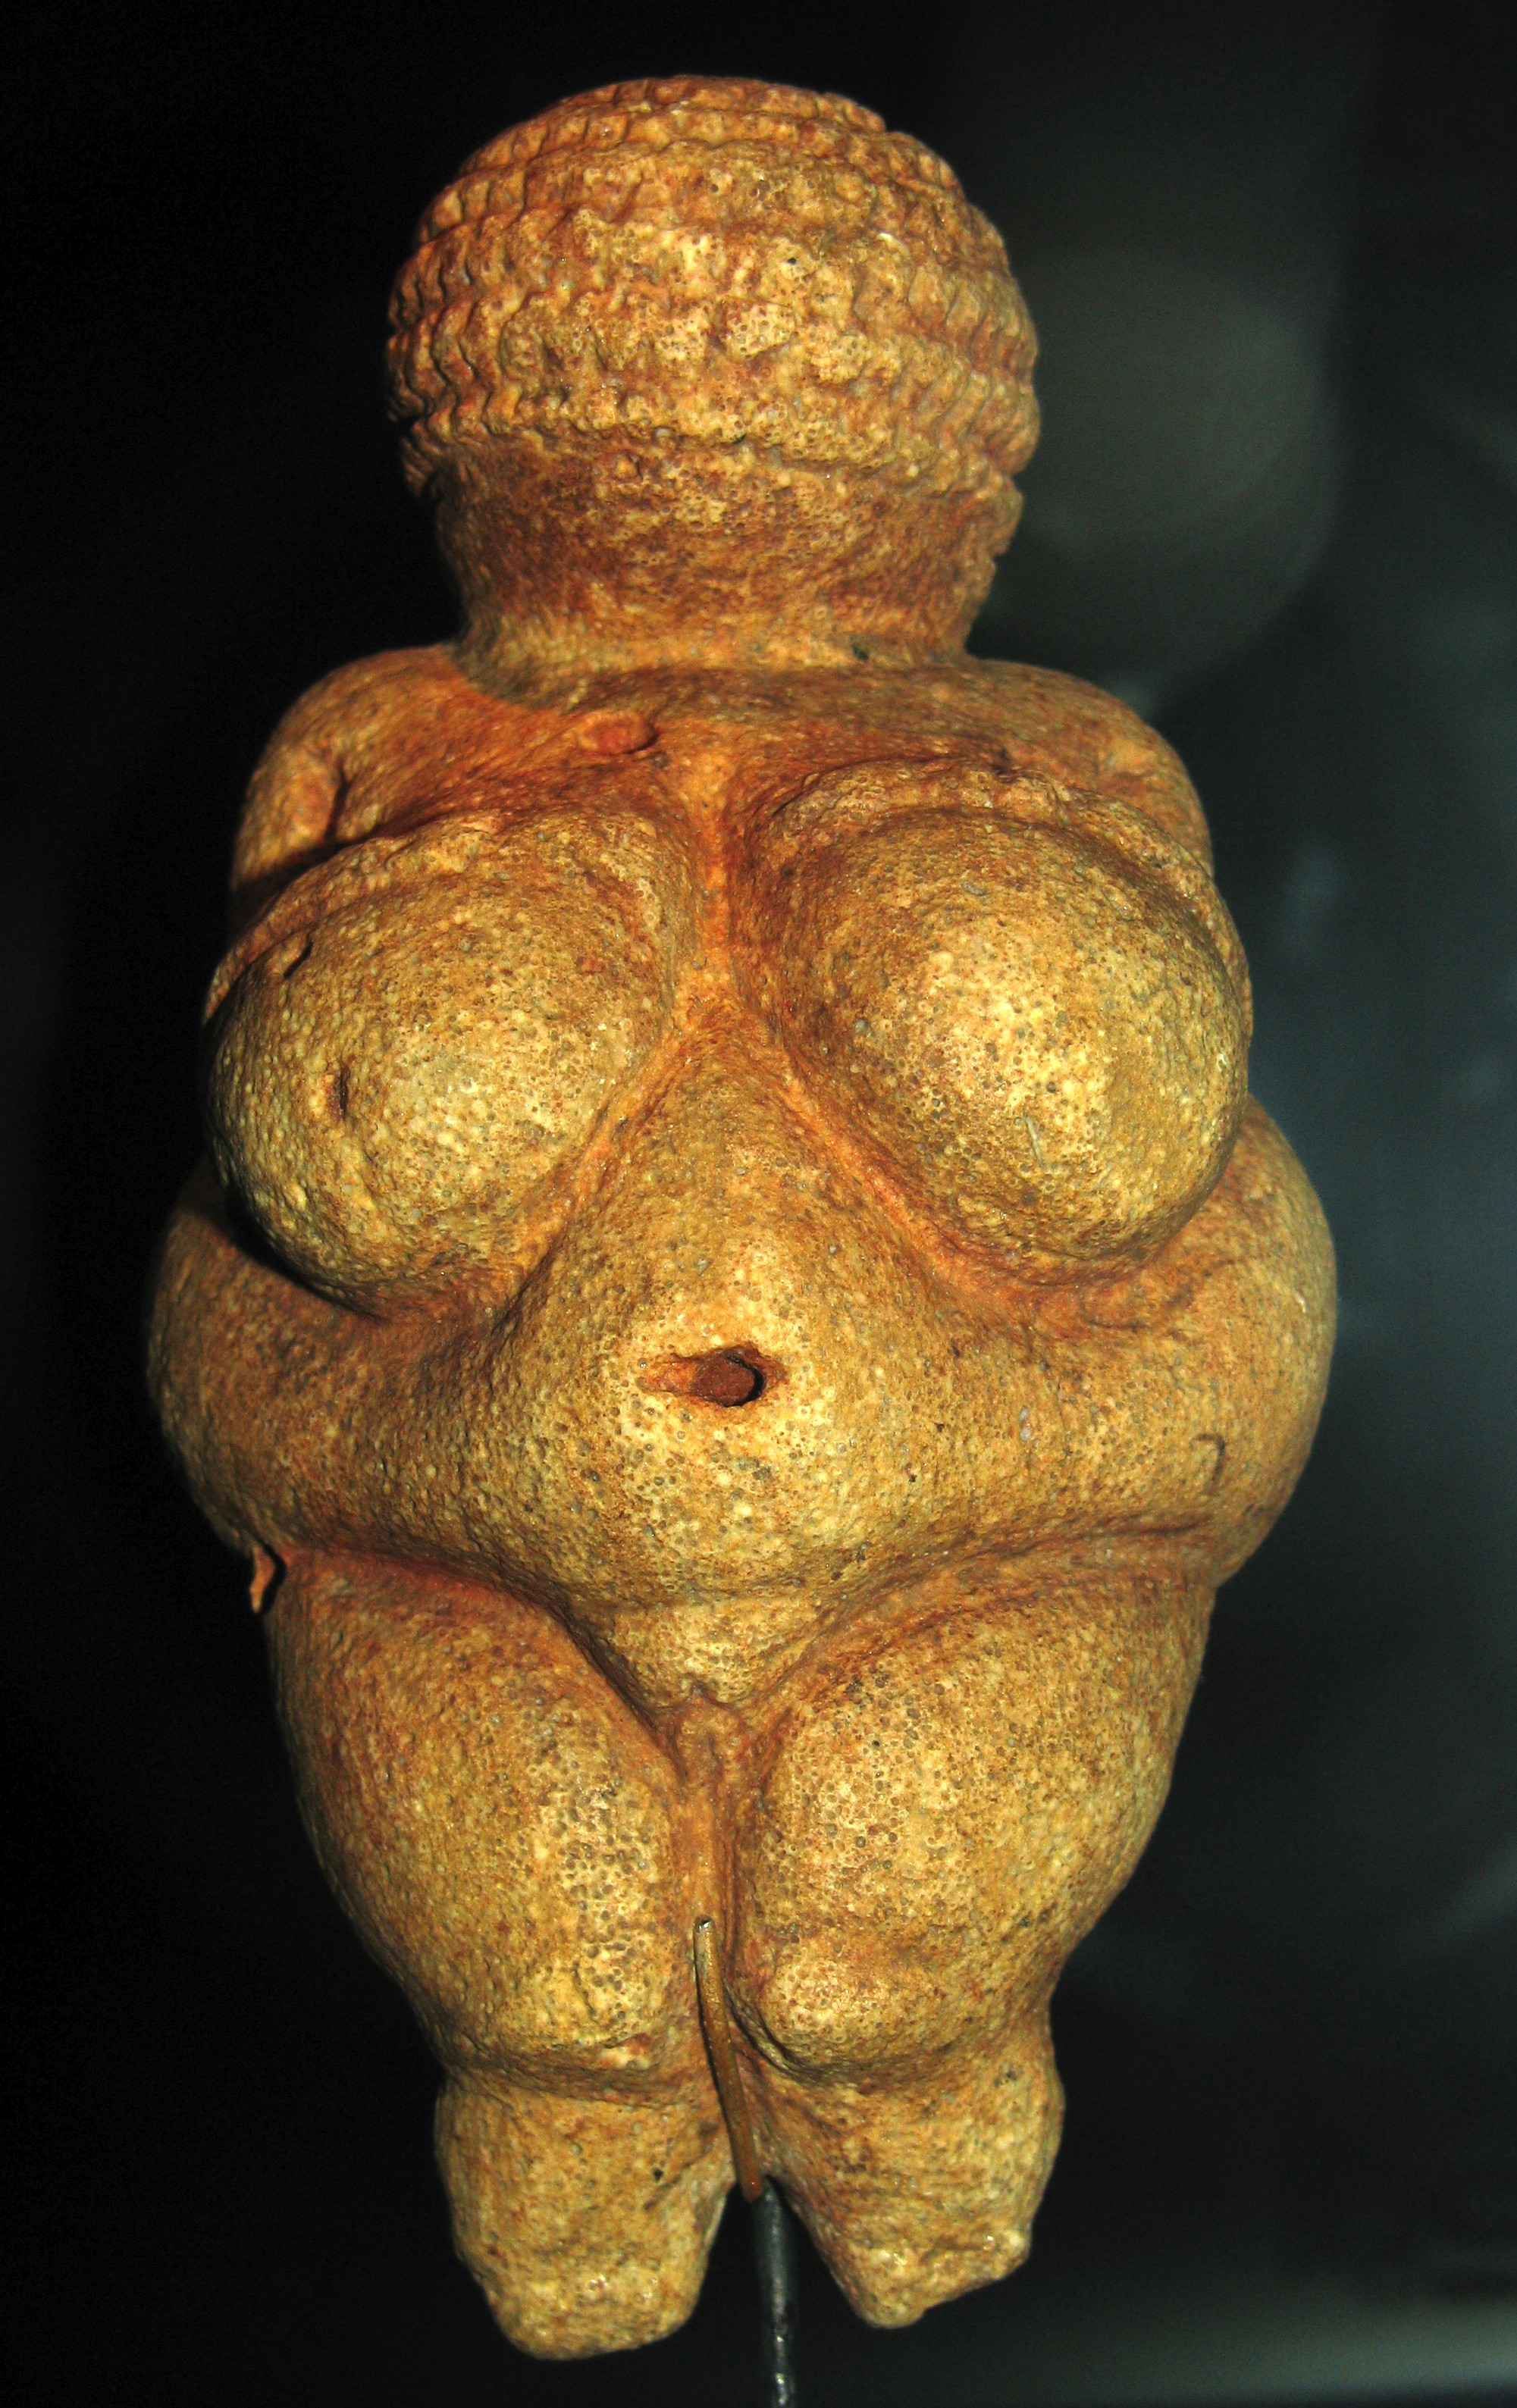 No image problem 23,000 years ago, when the "Venus of Willendorf" was made! Found in Austria in 1908, she's four inches high and carved from oolitic limestone. - DON HITCHCOCK, WIKIMEDIA COMMONS